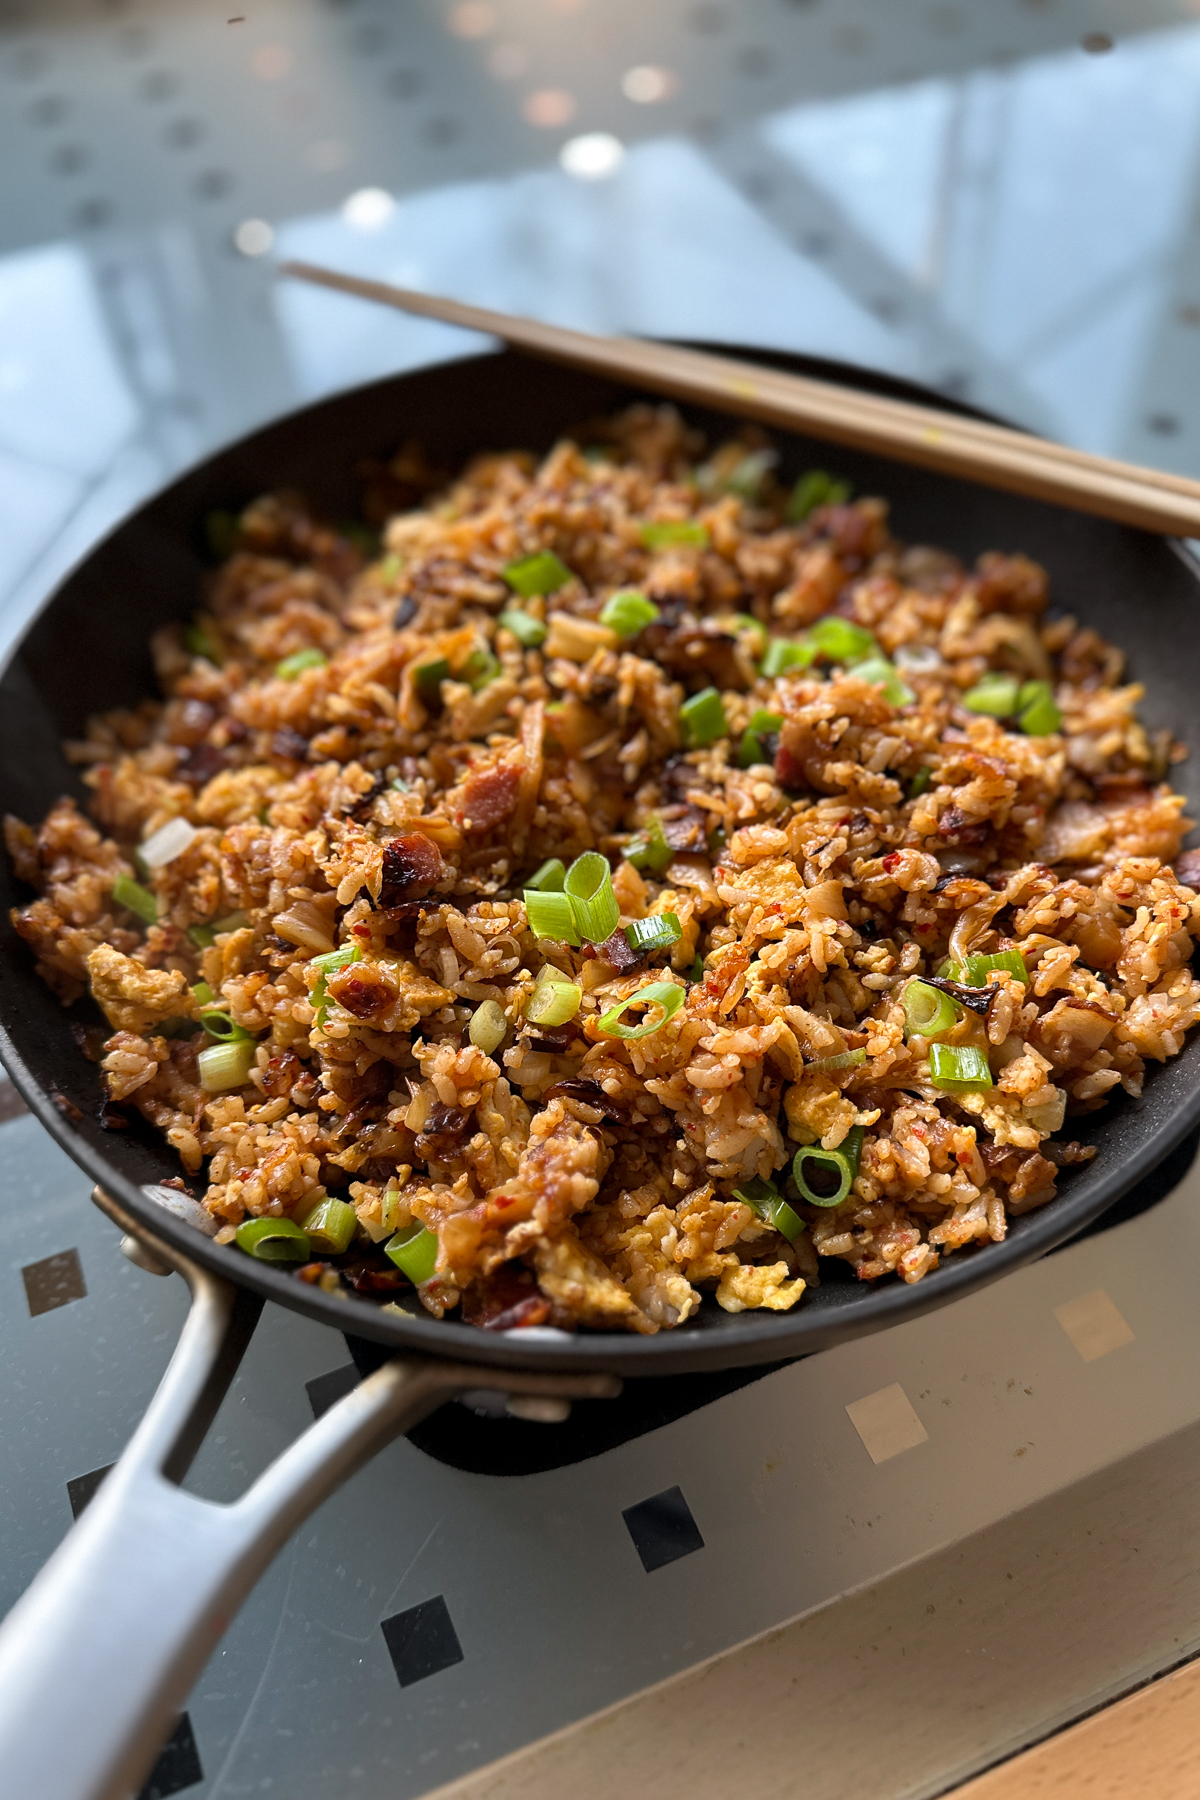 Kimchi fried rice in a pan, ready to eat and enjoy.